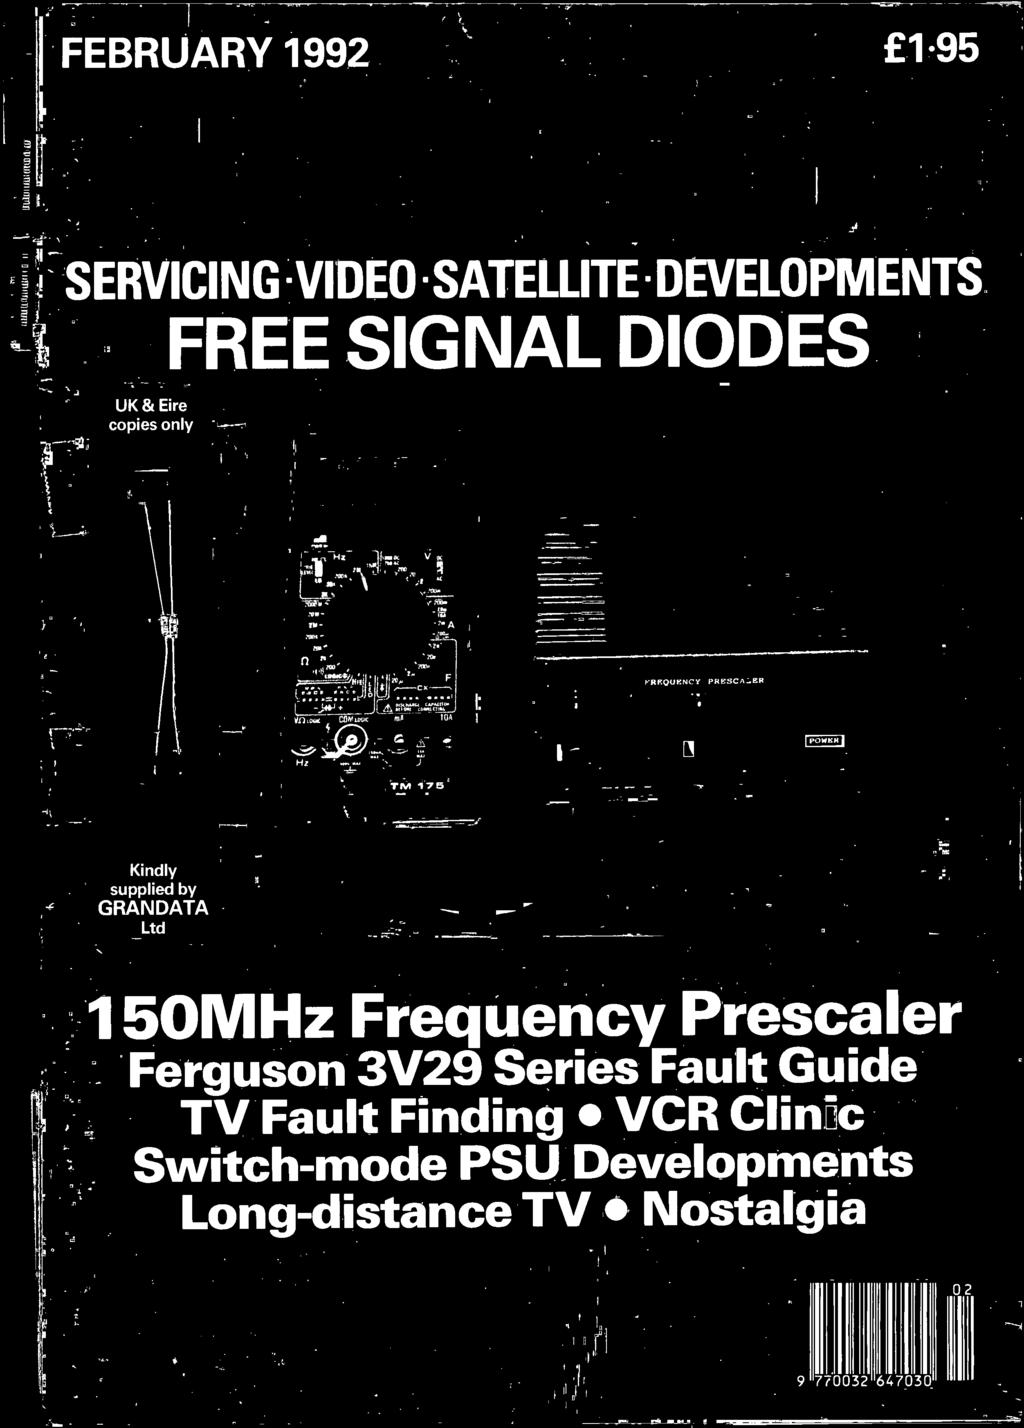 Series Fault Guide TV Fault Finding VCR Clinic